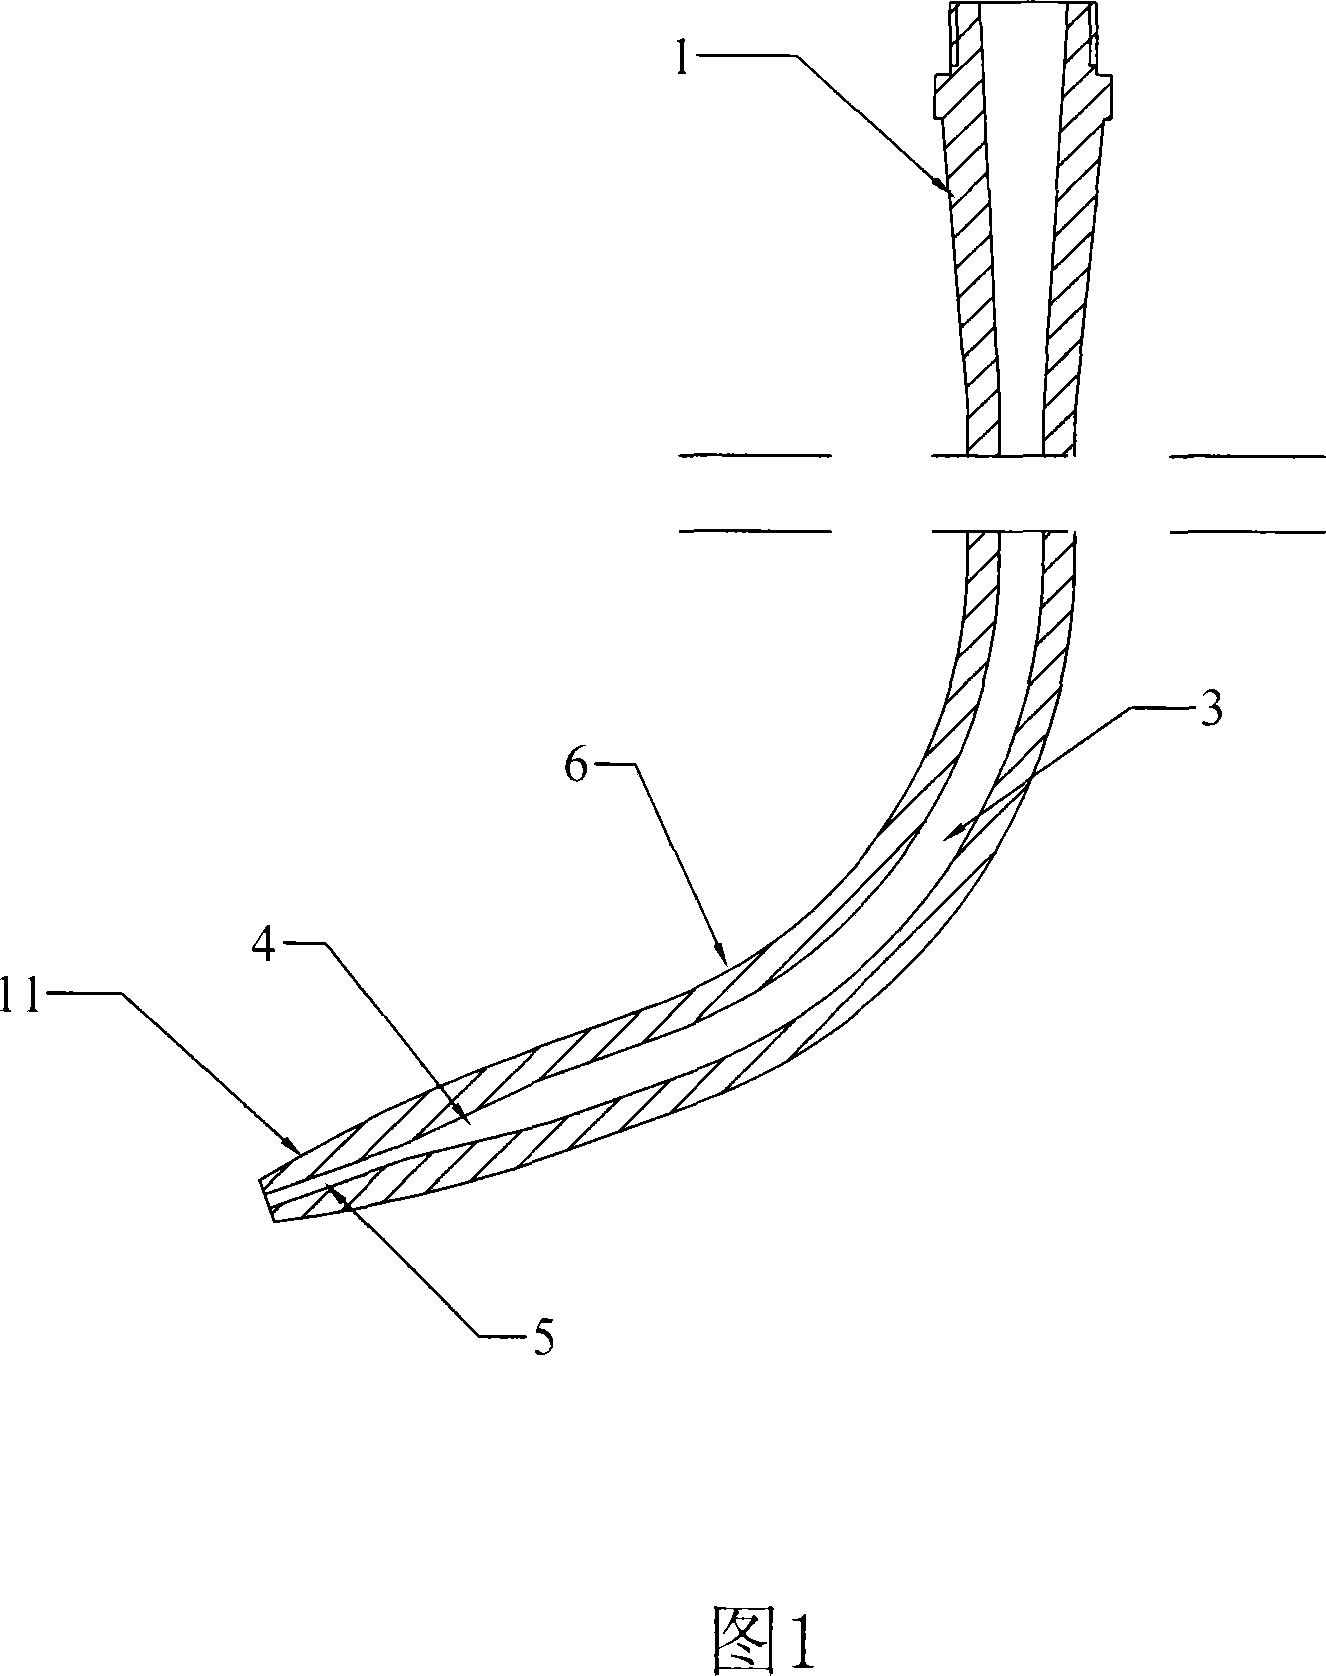 Posterior urethral probe and puncture needle